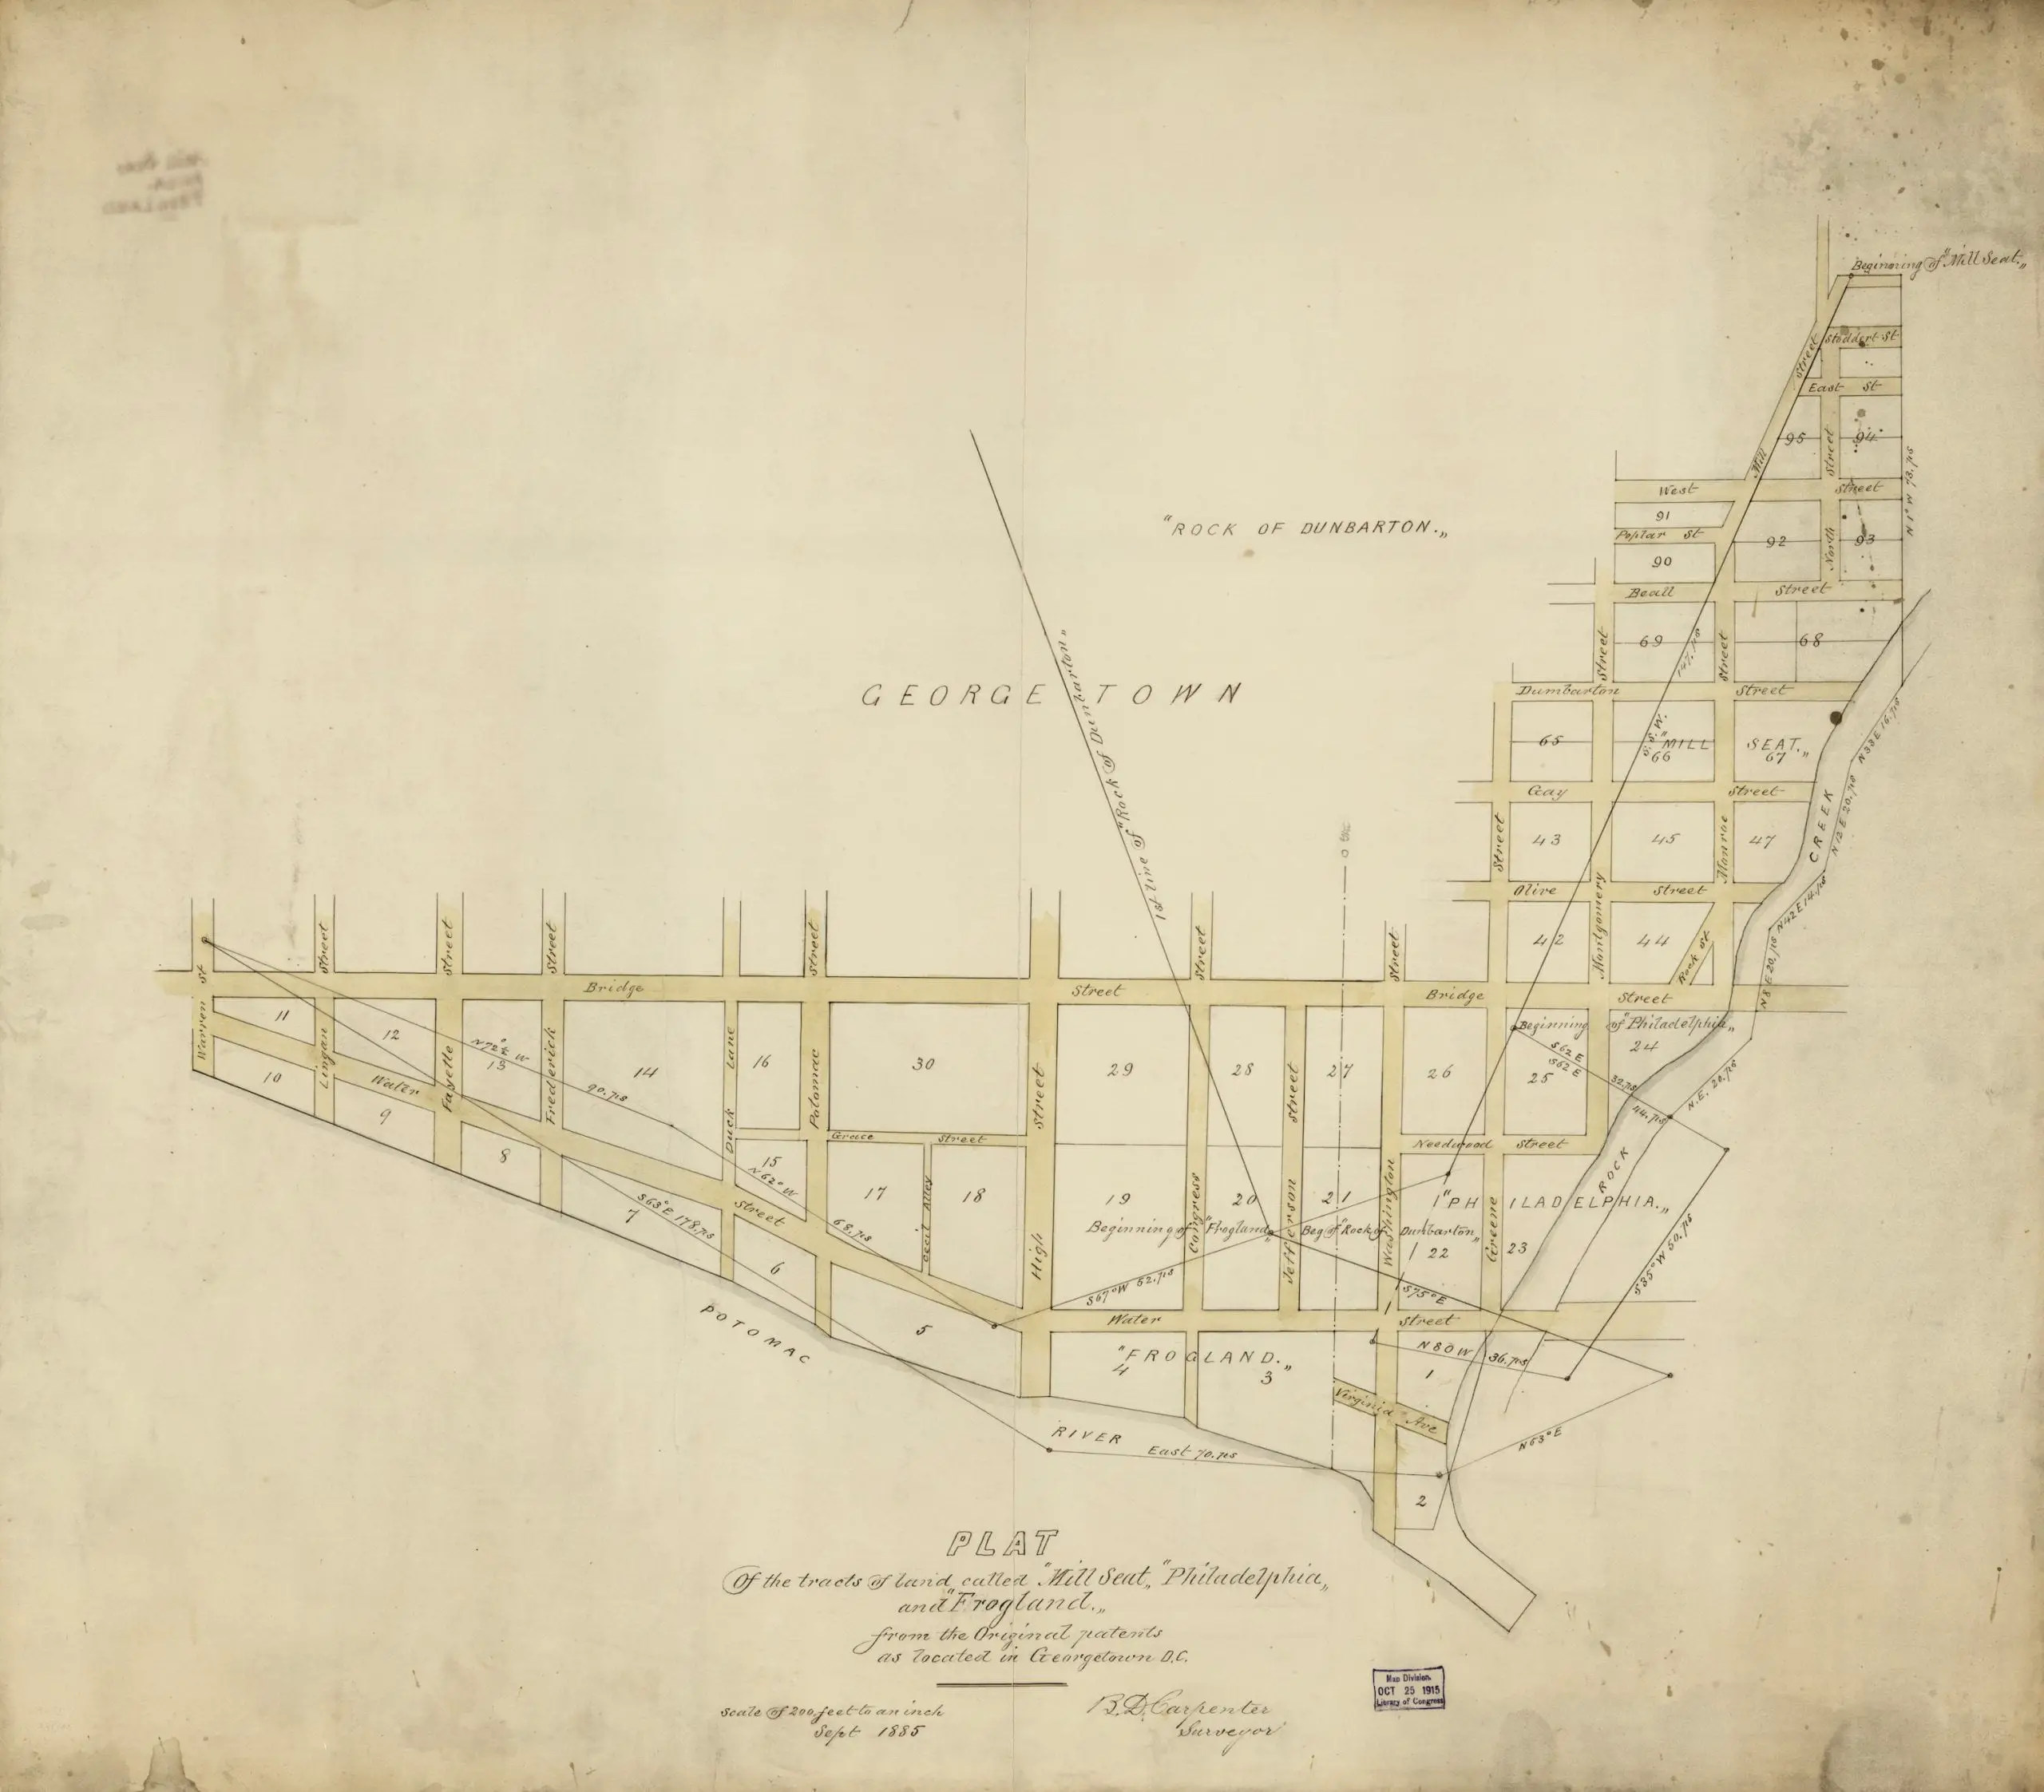 Plat of the tracts of land called "Mill Seat," "Philadelphia," and "Frogland," from the original patents as located in Georgetown D.C. / B.D. Carpenter, surveyor.